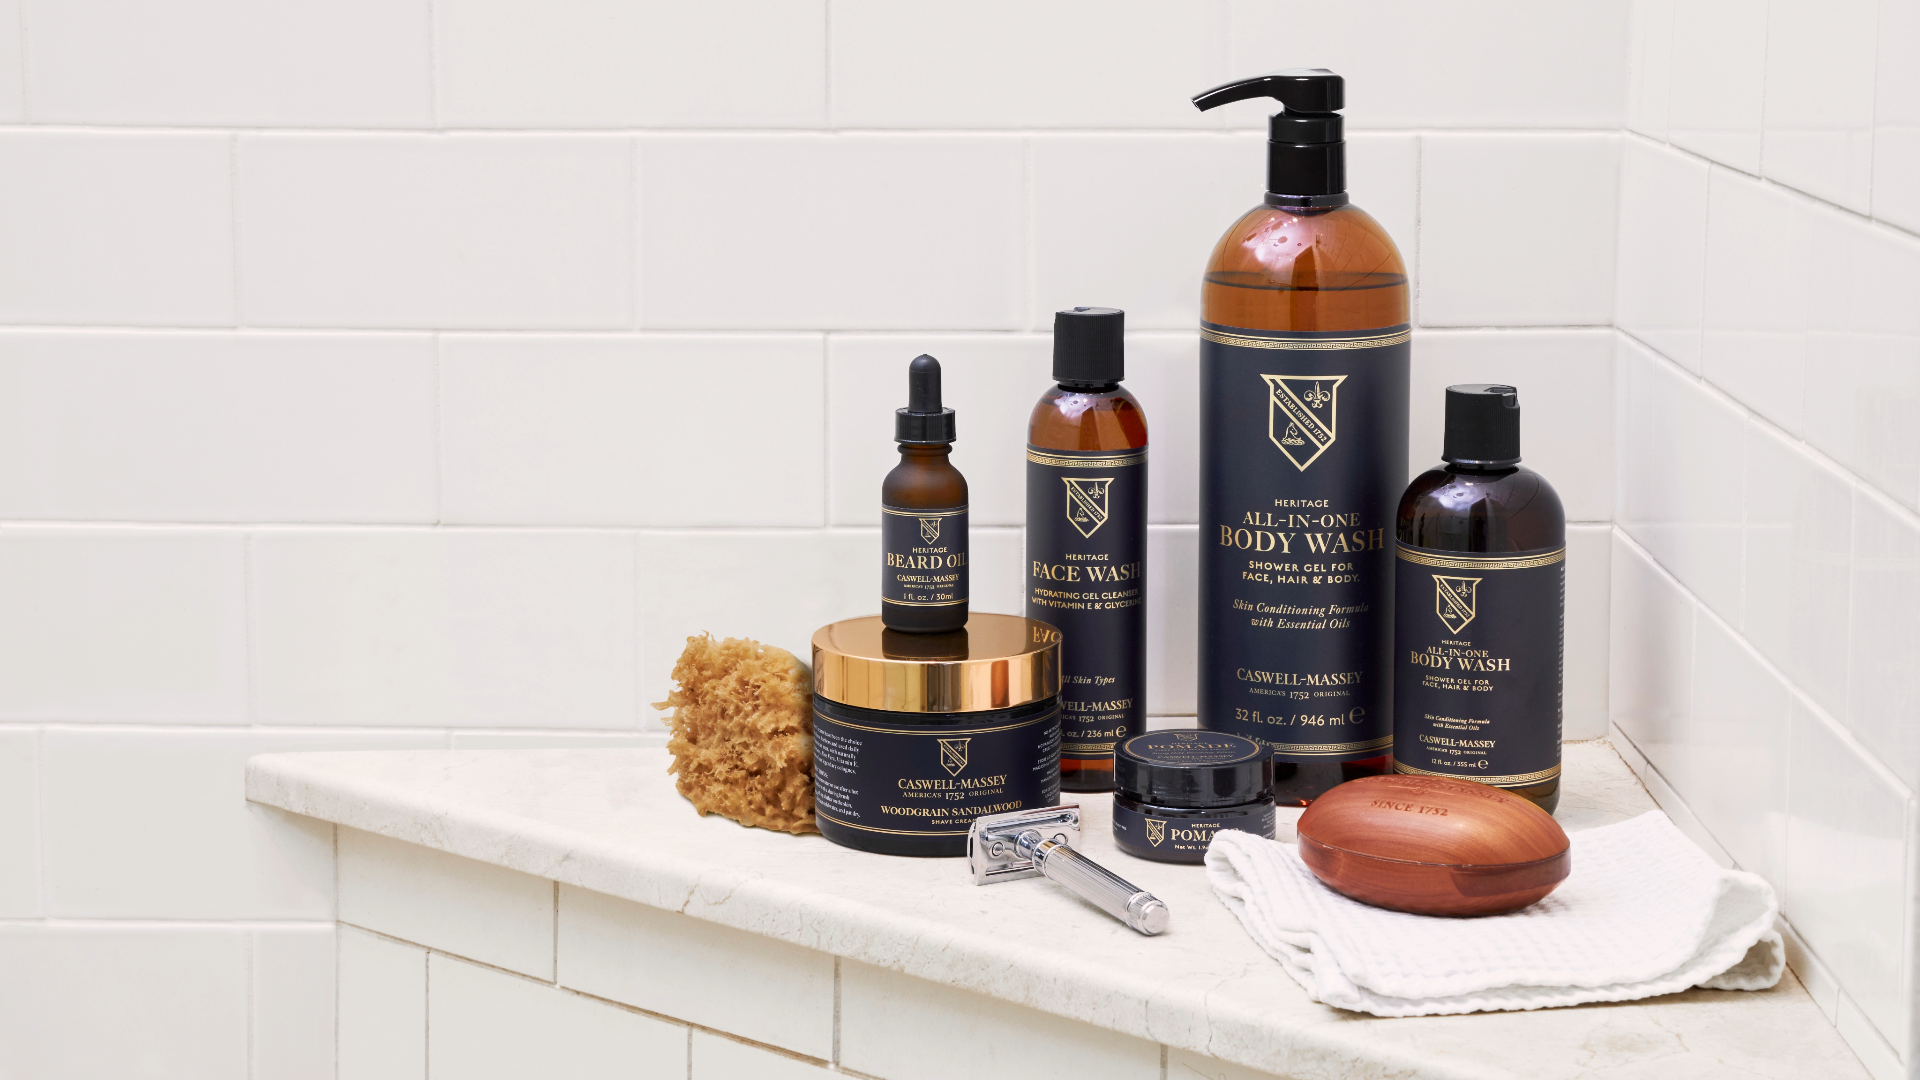 Caswell-Massey: Men's grooming and shave products on bath counter. Shave Cream, Beard Oil, Chrome Razor, Hair Pomade, Face Wash, All-in-One Body Wash, and Woodgrain Sandalwood Bar Soap